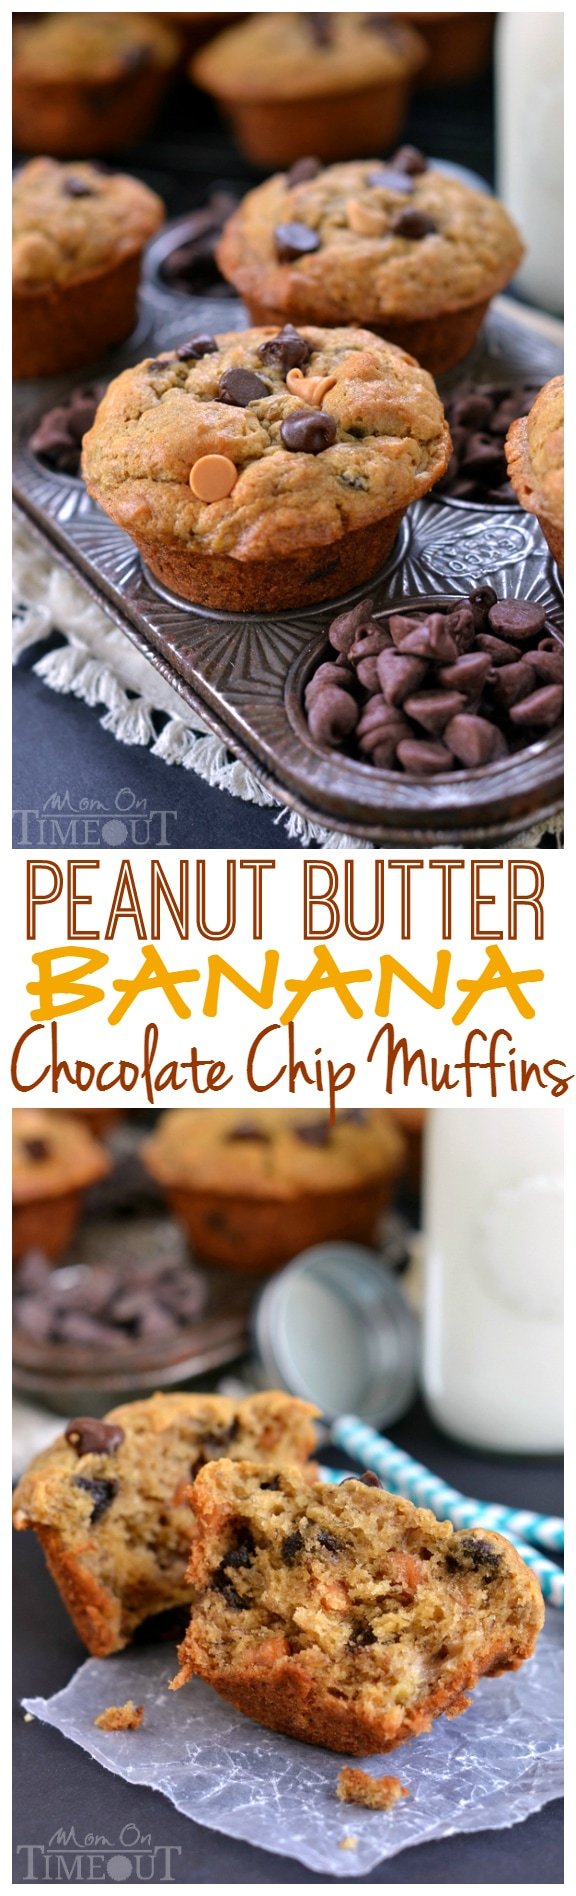 Incredibly moist and delicious Peanut Butter Banana Chocolate Chip Muffins packed with peanut butter flavor and sweet morsels of chocolate. For mornings when you just need a little chocolate. | MomOnTimeout.com | #recipe #breakfast